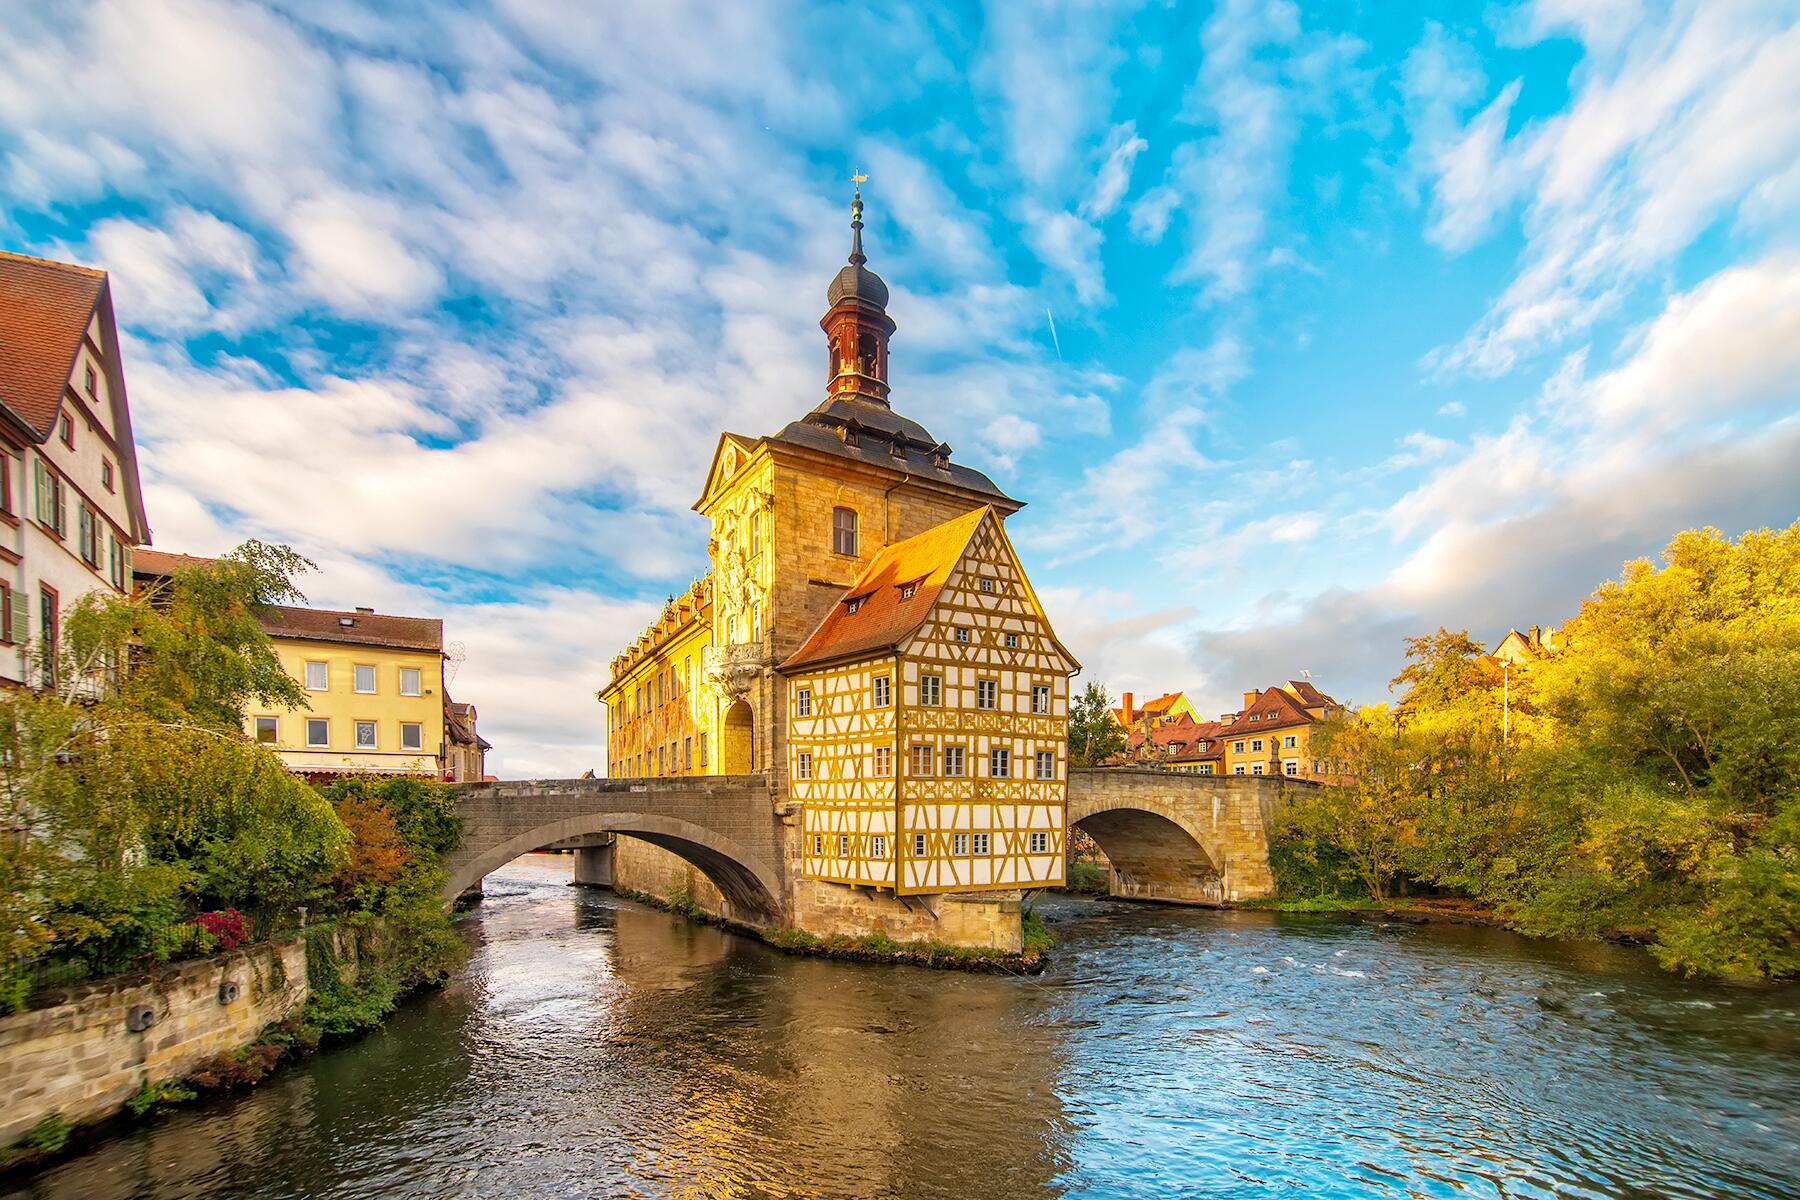 12 Quaint Fairy-tale Towns in Germany